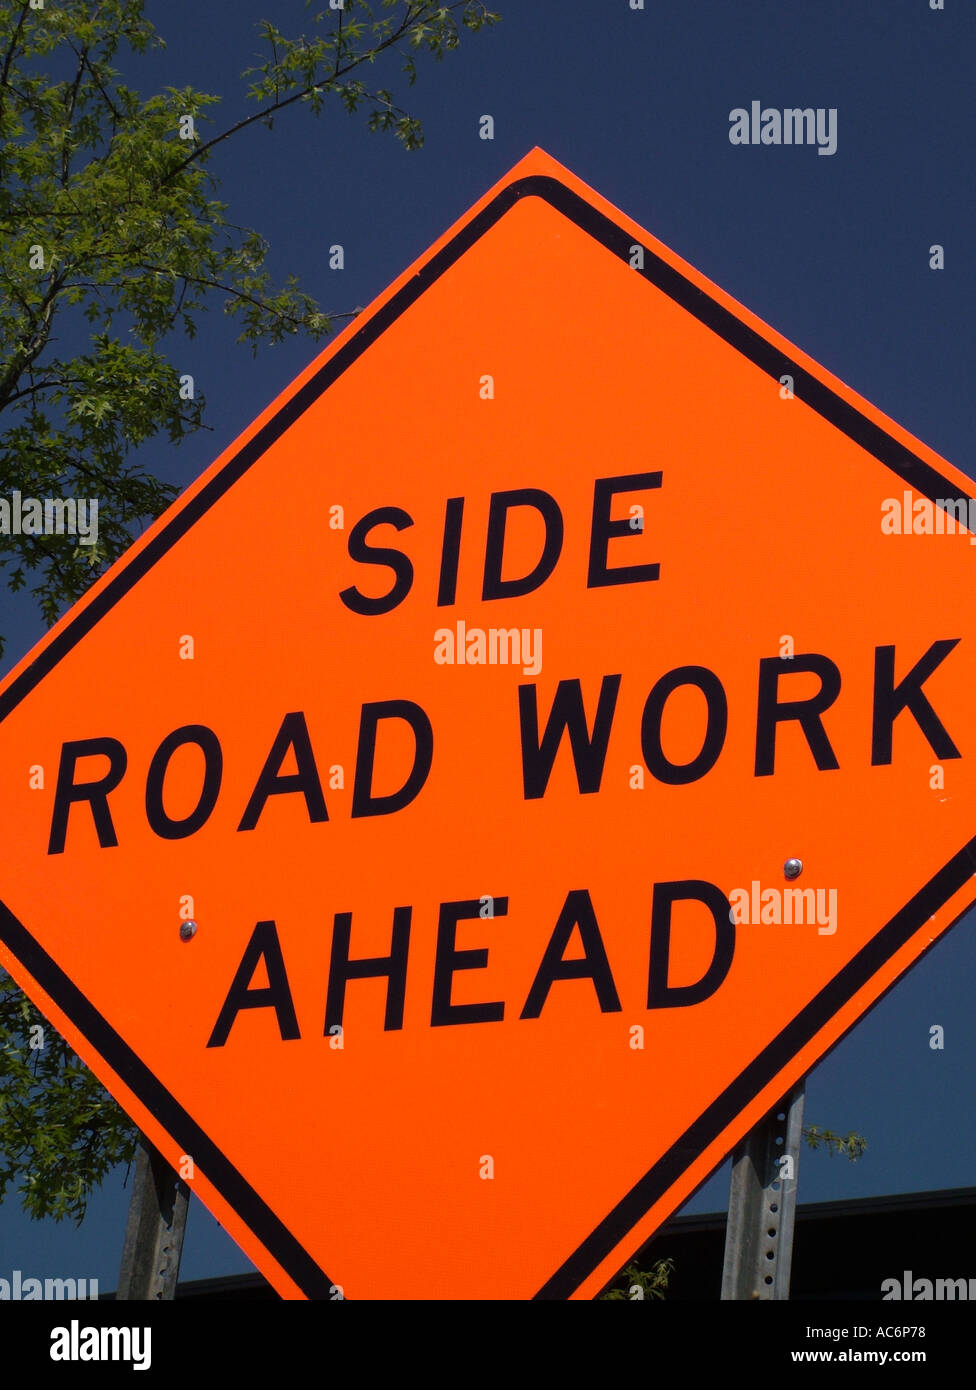 AJD42891, road sign, Side Road Work Ahead Stock Photo